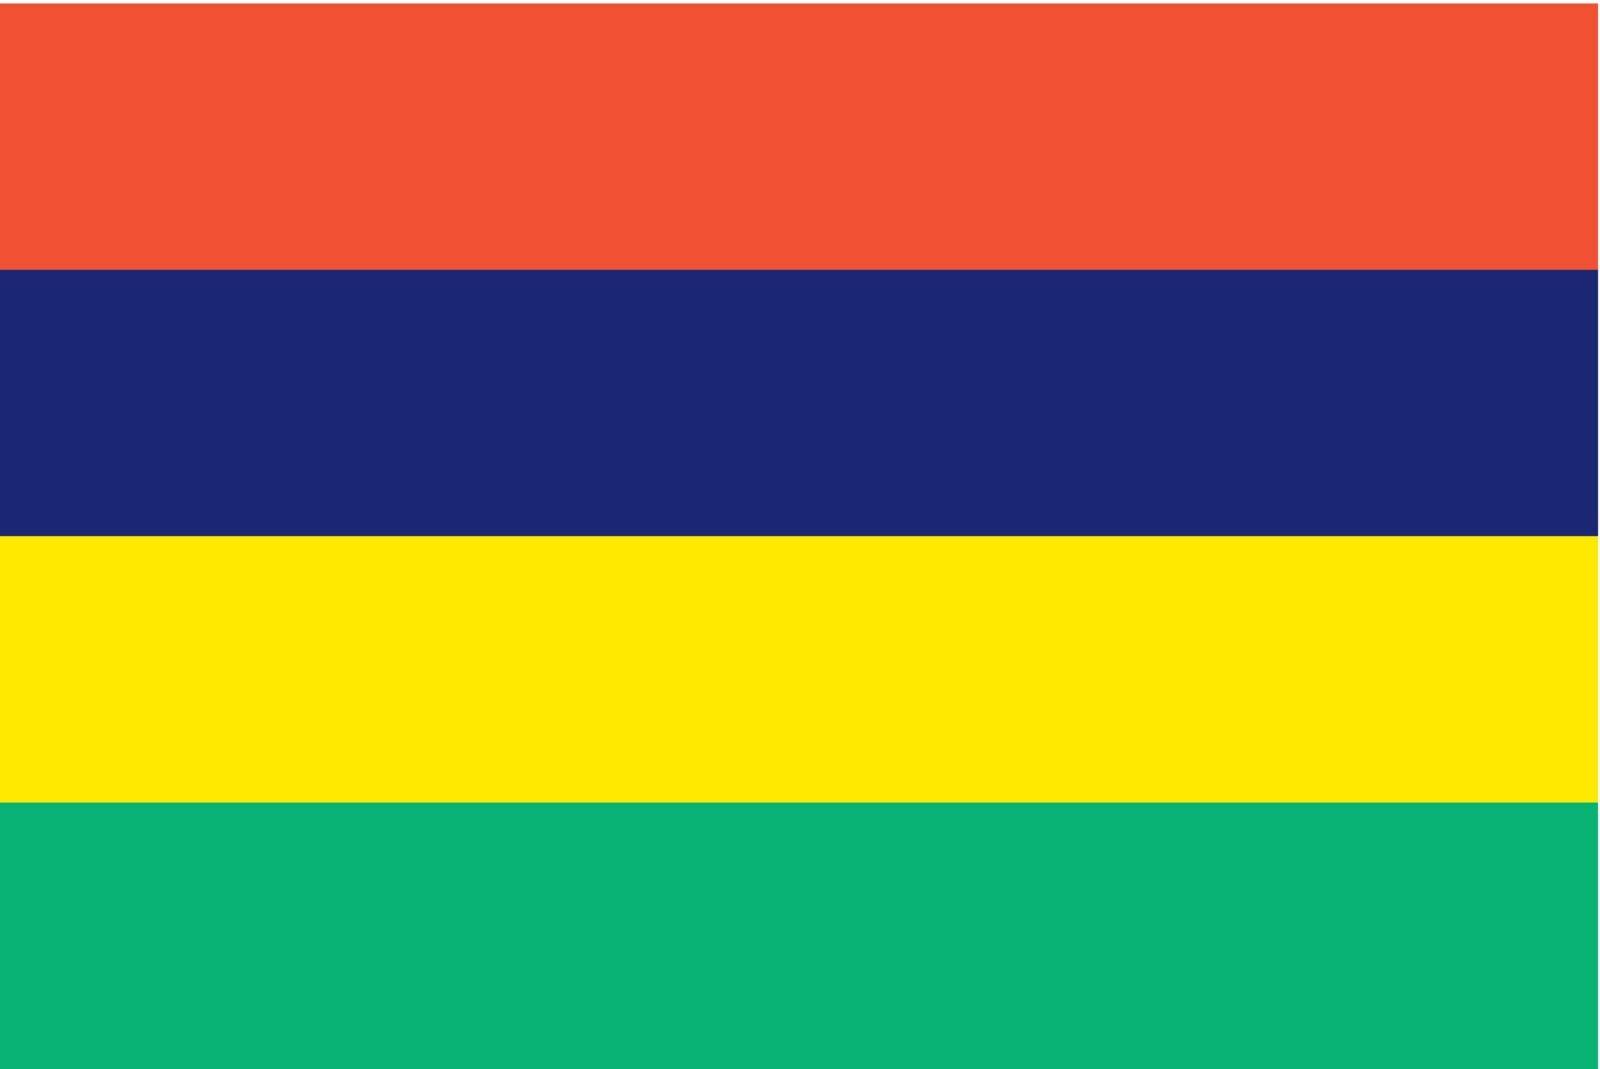 Mauritius flag by oxygen64